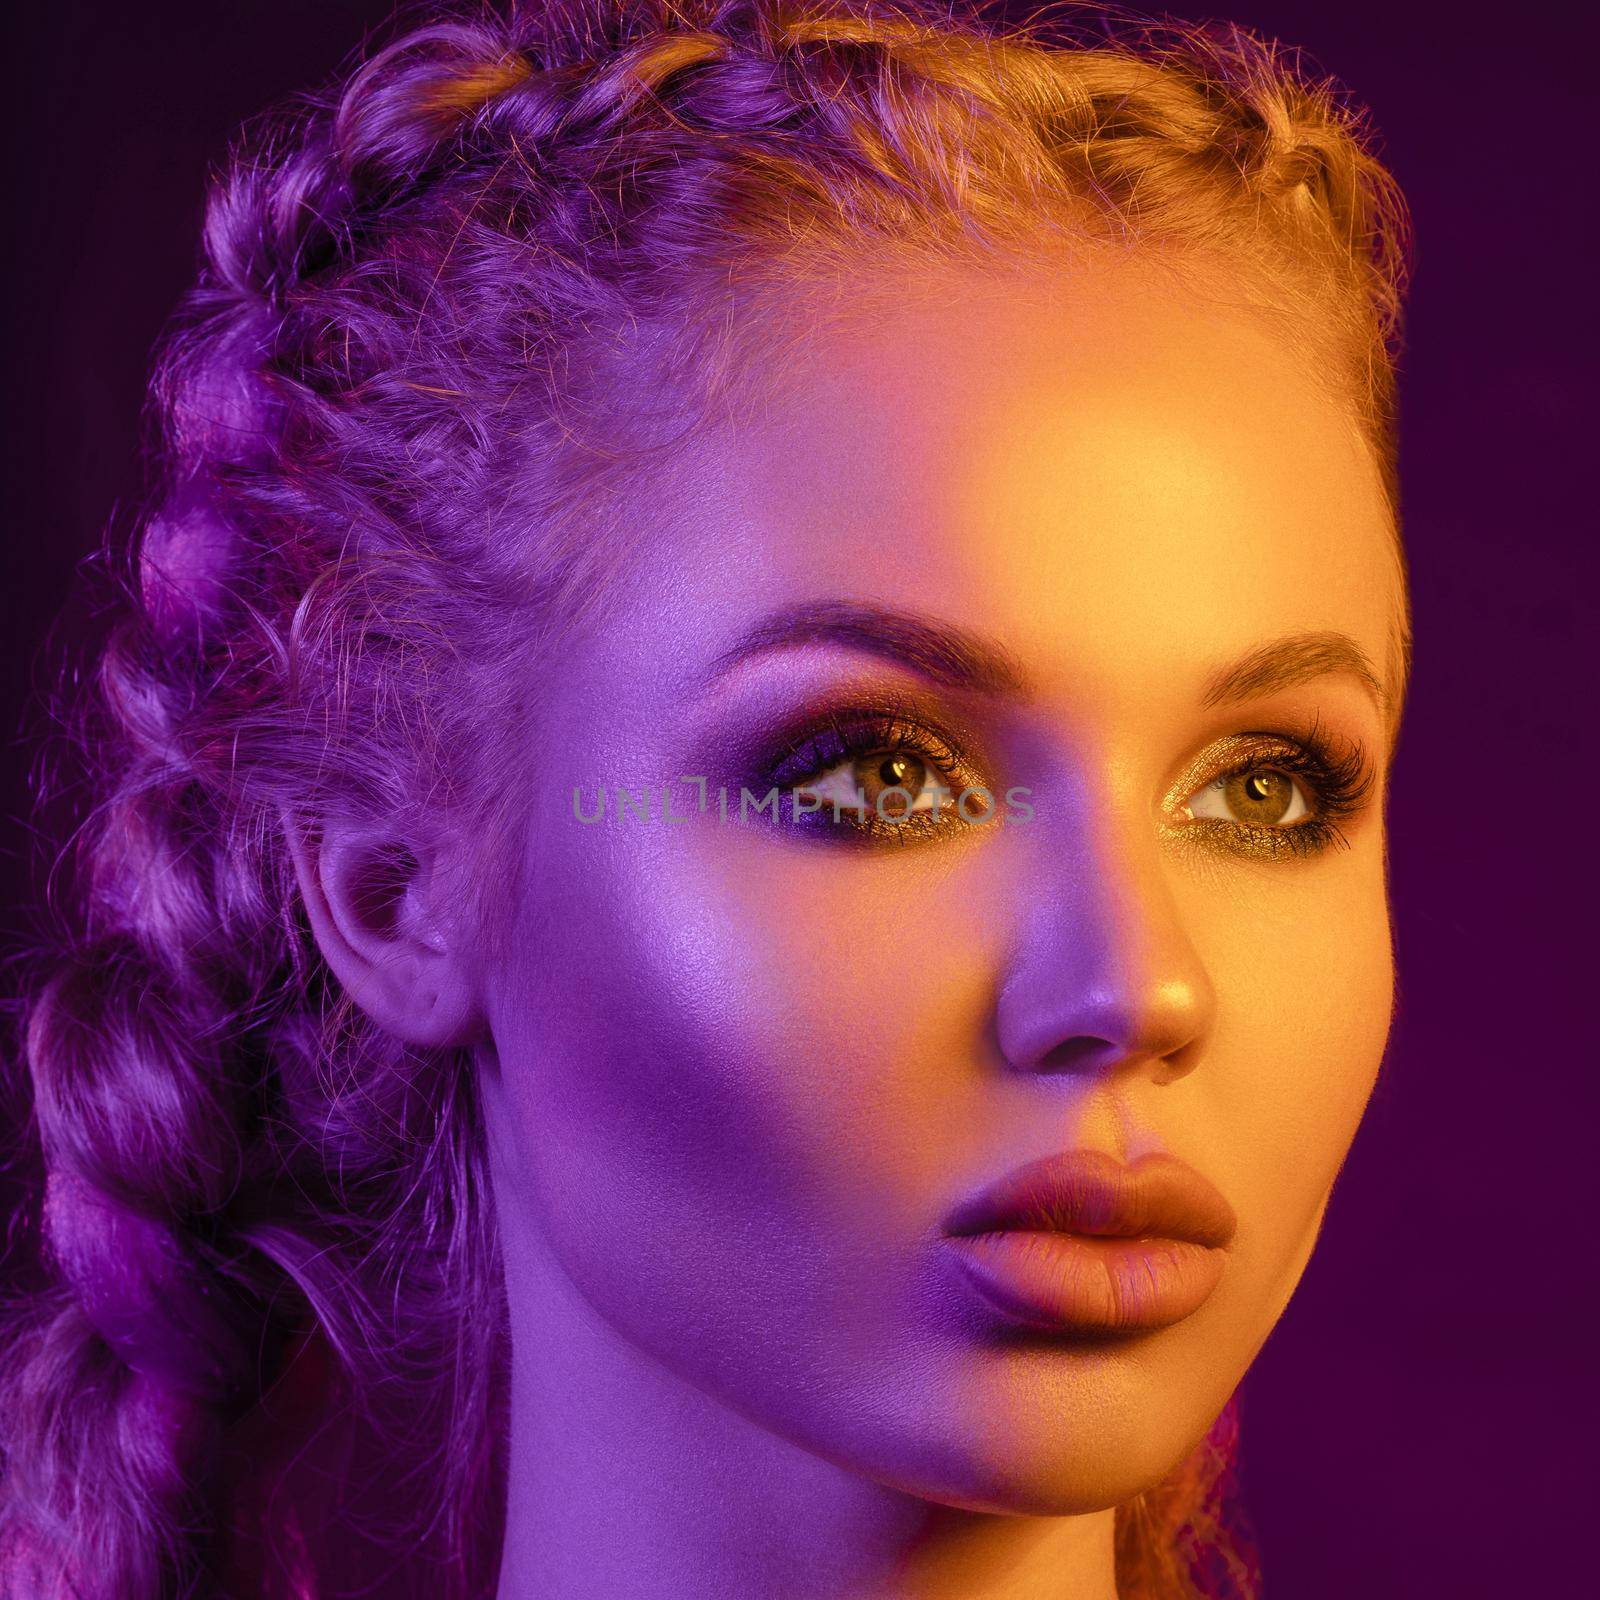 Fashion portrait of stunning sexy young blonde woman with trendy braids and sparkling bra under the net top. She is holding peace sign by the eye, making pouting lips in bright pink and yellow light.